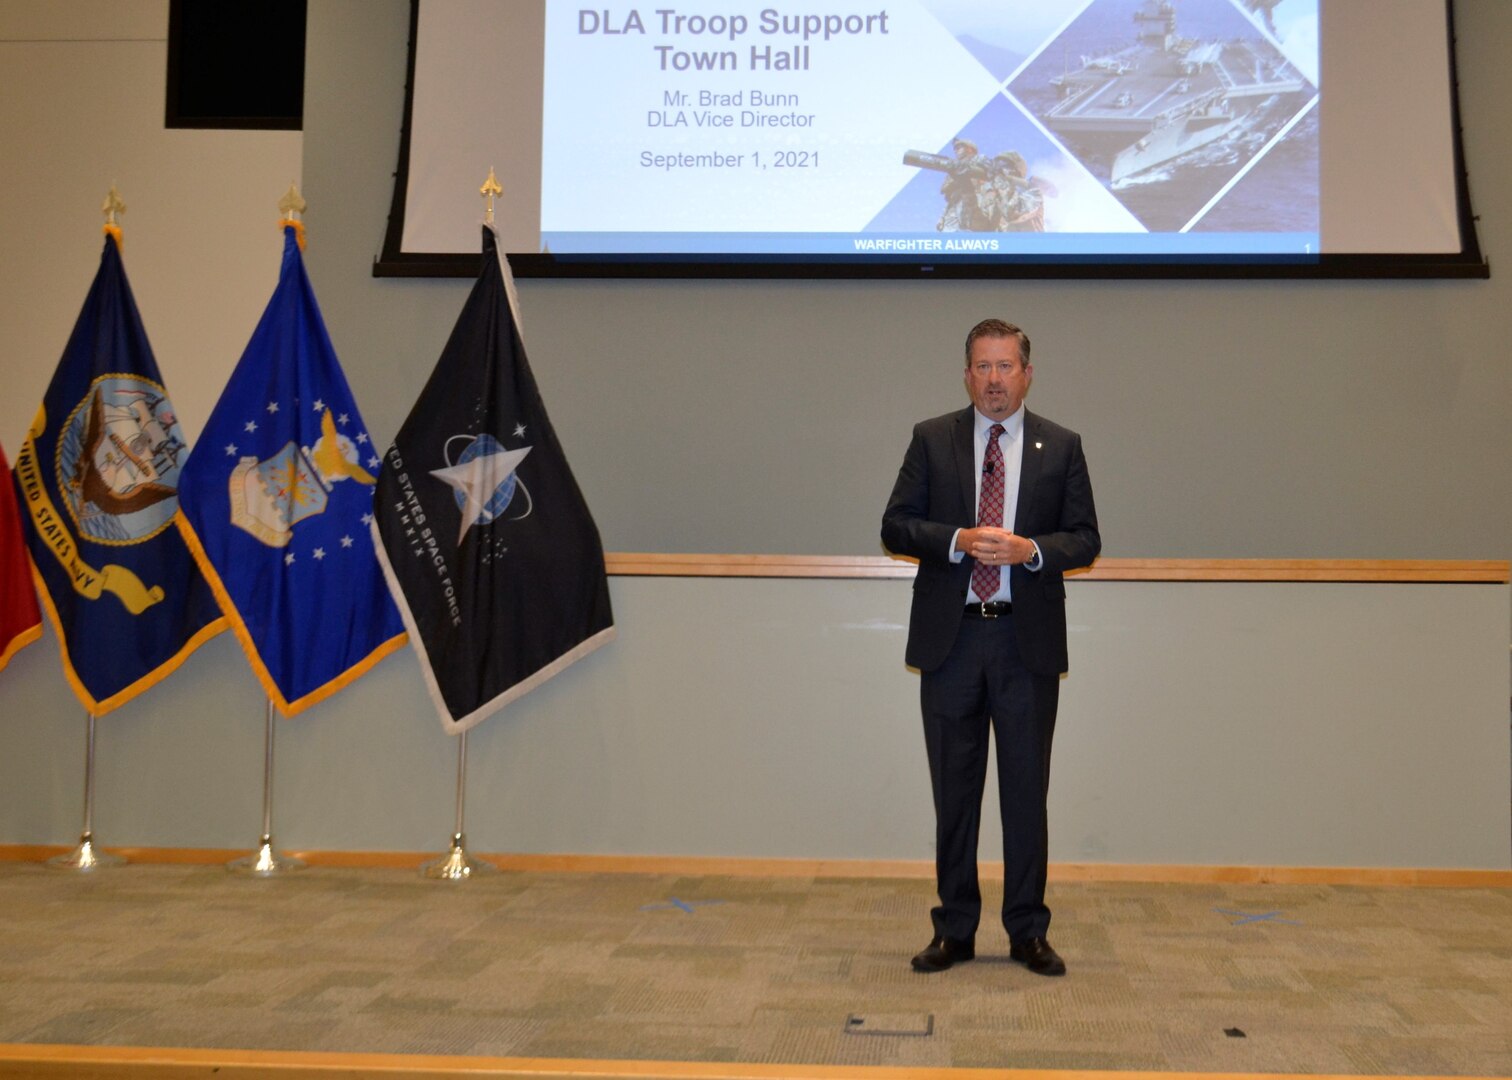 DLA Vice Director Brad Bunn hosts a town hall during a visit to DLA Philadelphia, September 1, 2021, for the first time in his current role. Employees attended the event in-person and virtually.